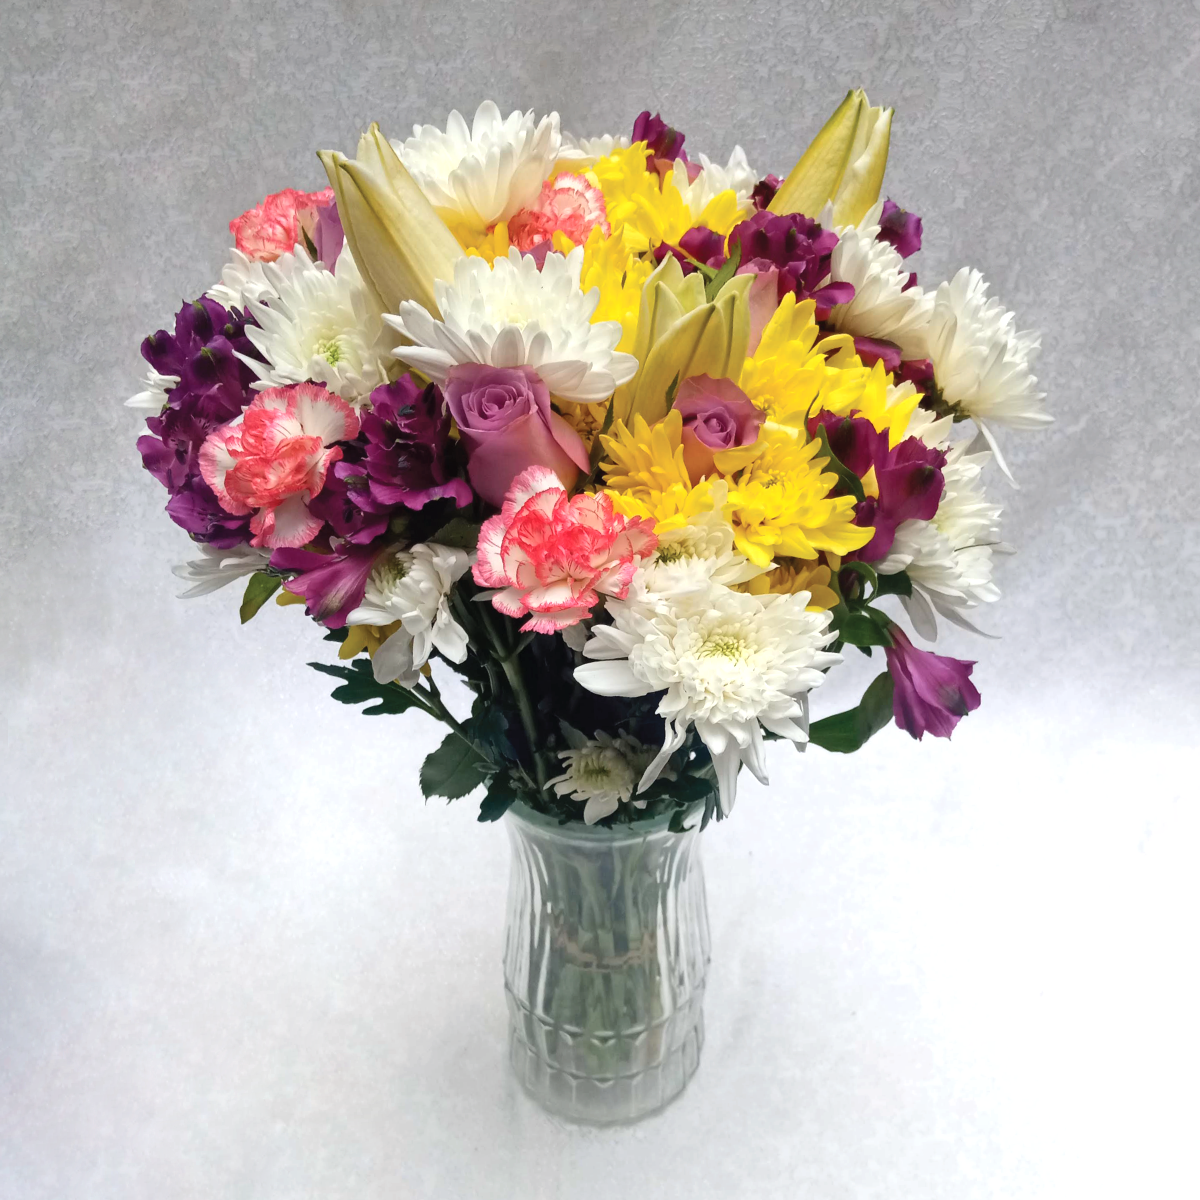 The Velvets Touch Vase Flower arrangement by Simona Flowers Kenya. Consists of a variety of tropical flowers special to surprise a loved one, who has a love for purple, with; to let them know they are of great value in your life.